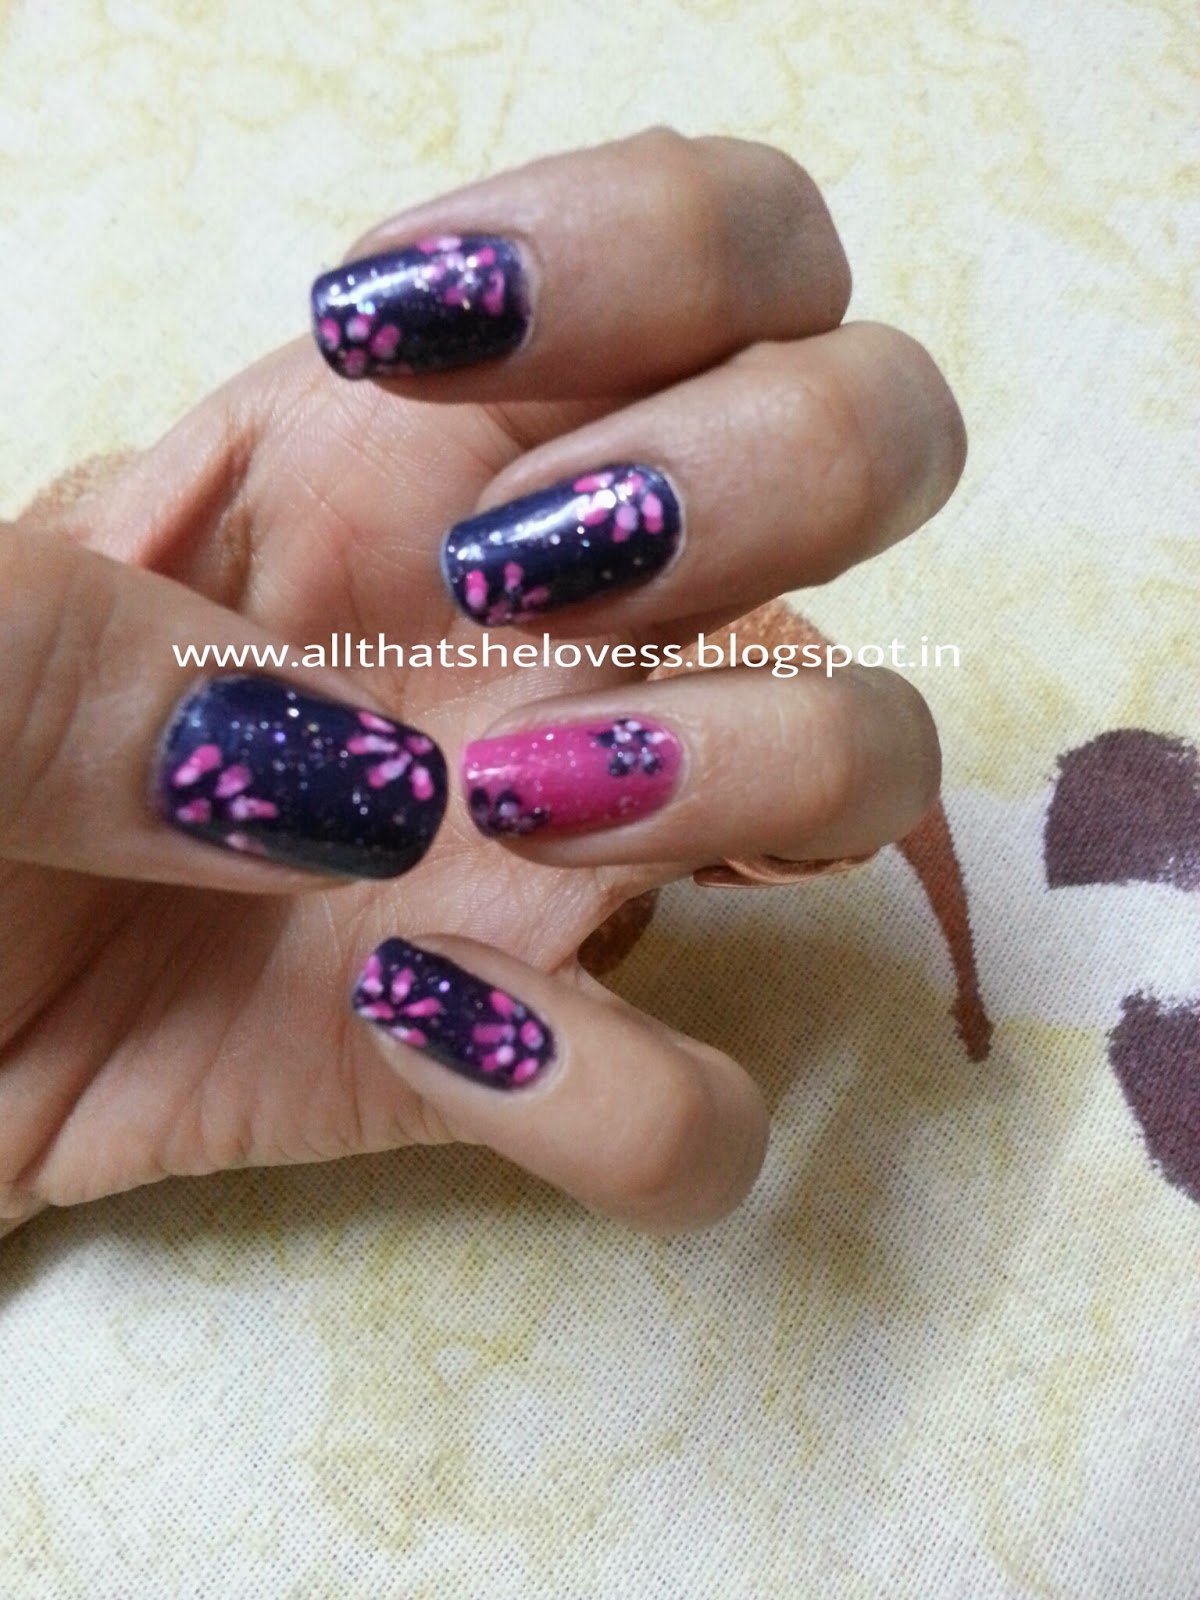 All that she lovess: Floral nail art design with an accent